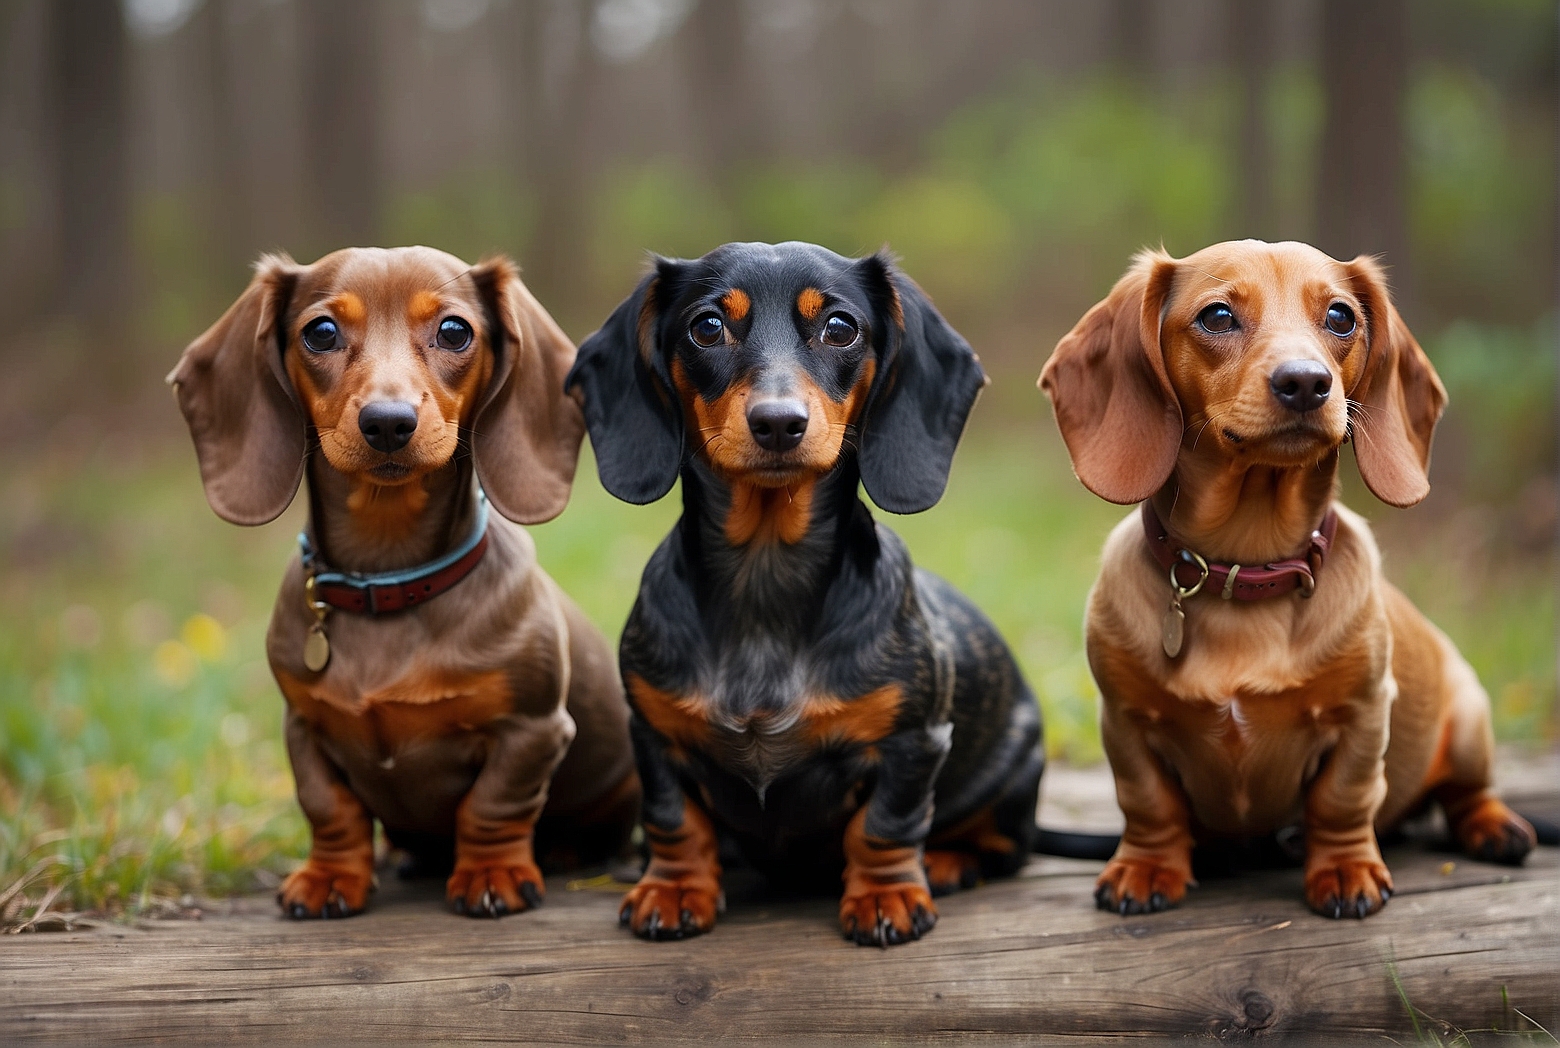 What Colors Are Dachshunds